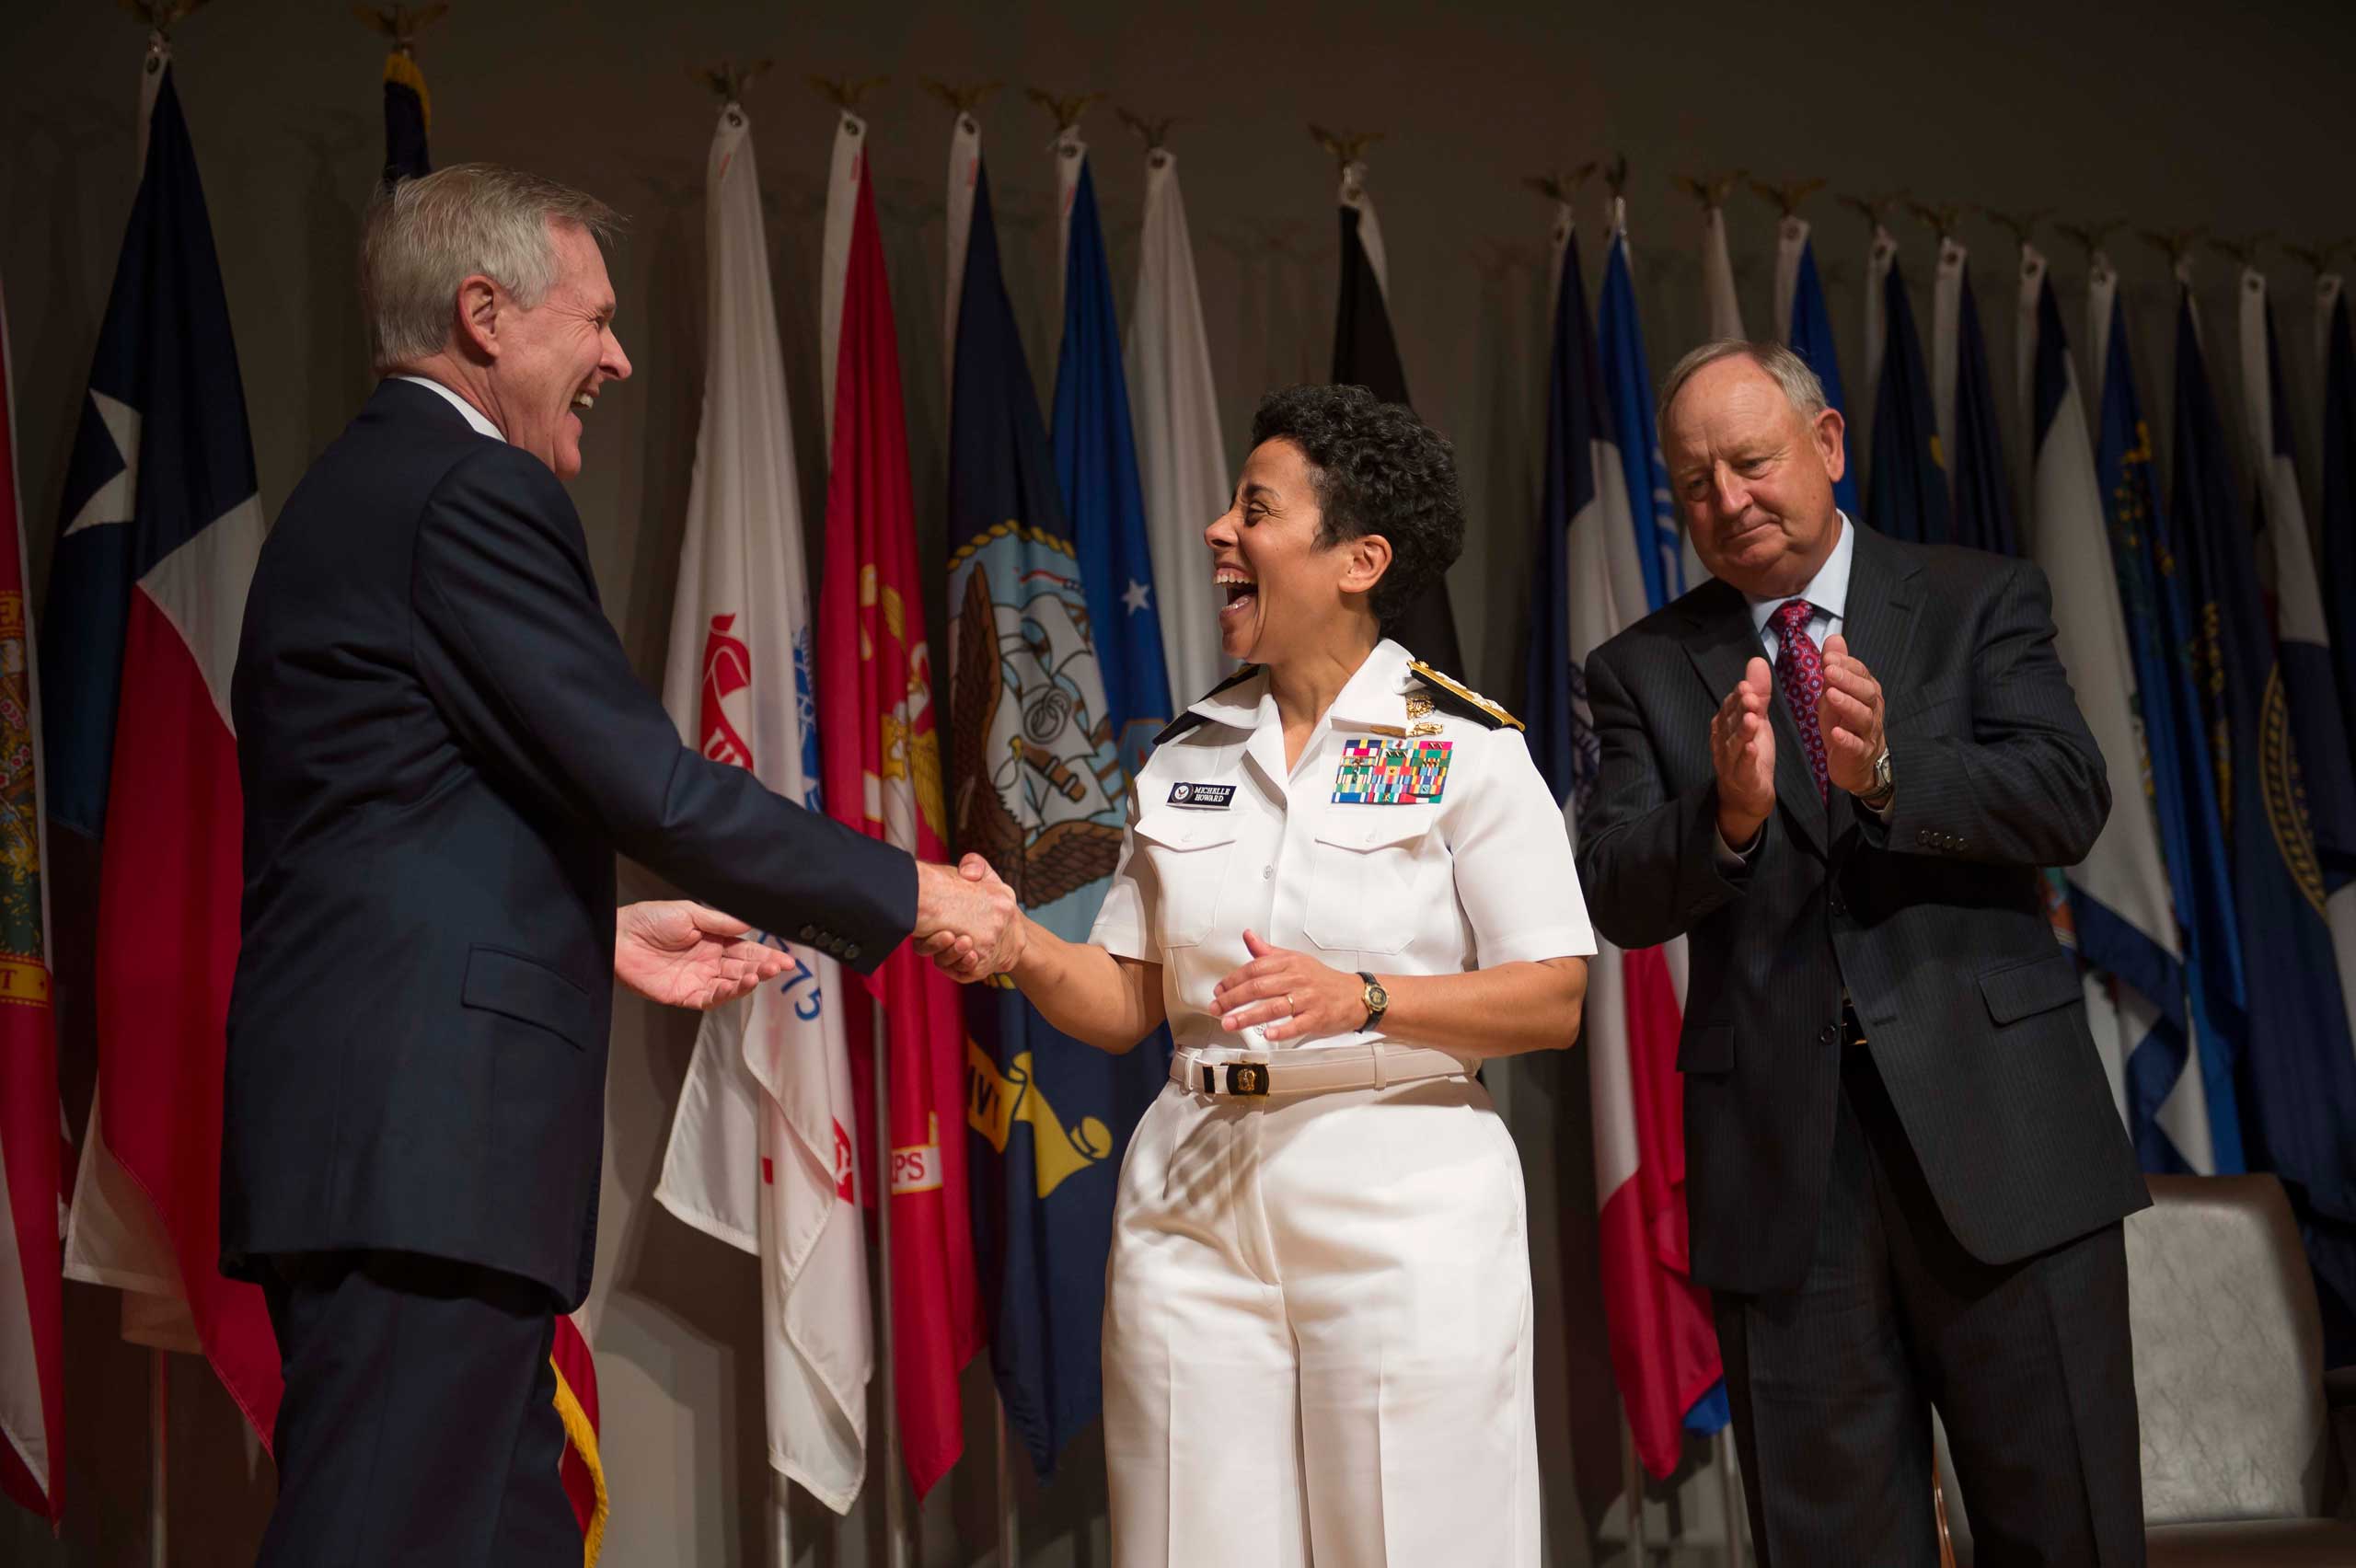 From Left: Secretary of the Navy Ray Mabus congratulates Adm. Michelle Howard after putting on her fourth star during her promotion ceremony at the Women in Military Service for America Memorial on July 1, 2014 in Washington, D.C.